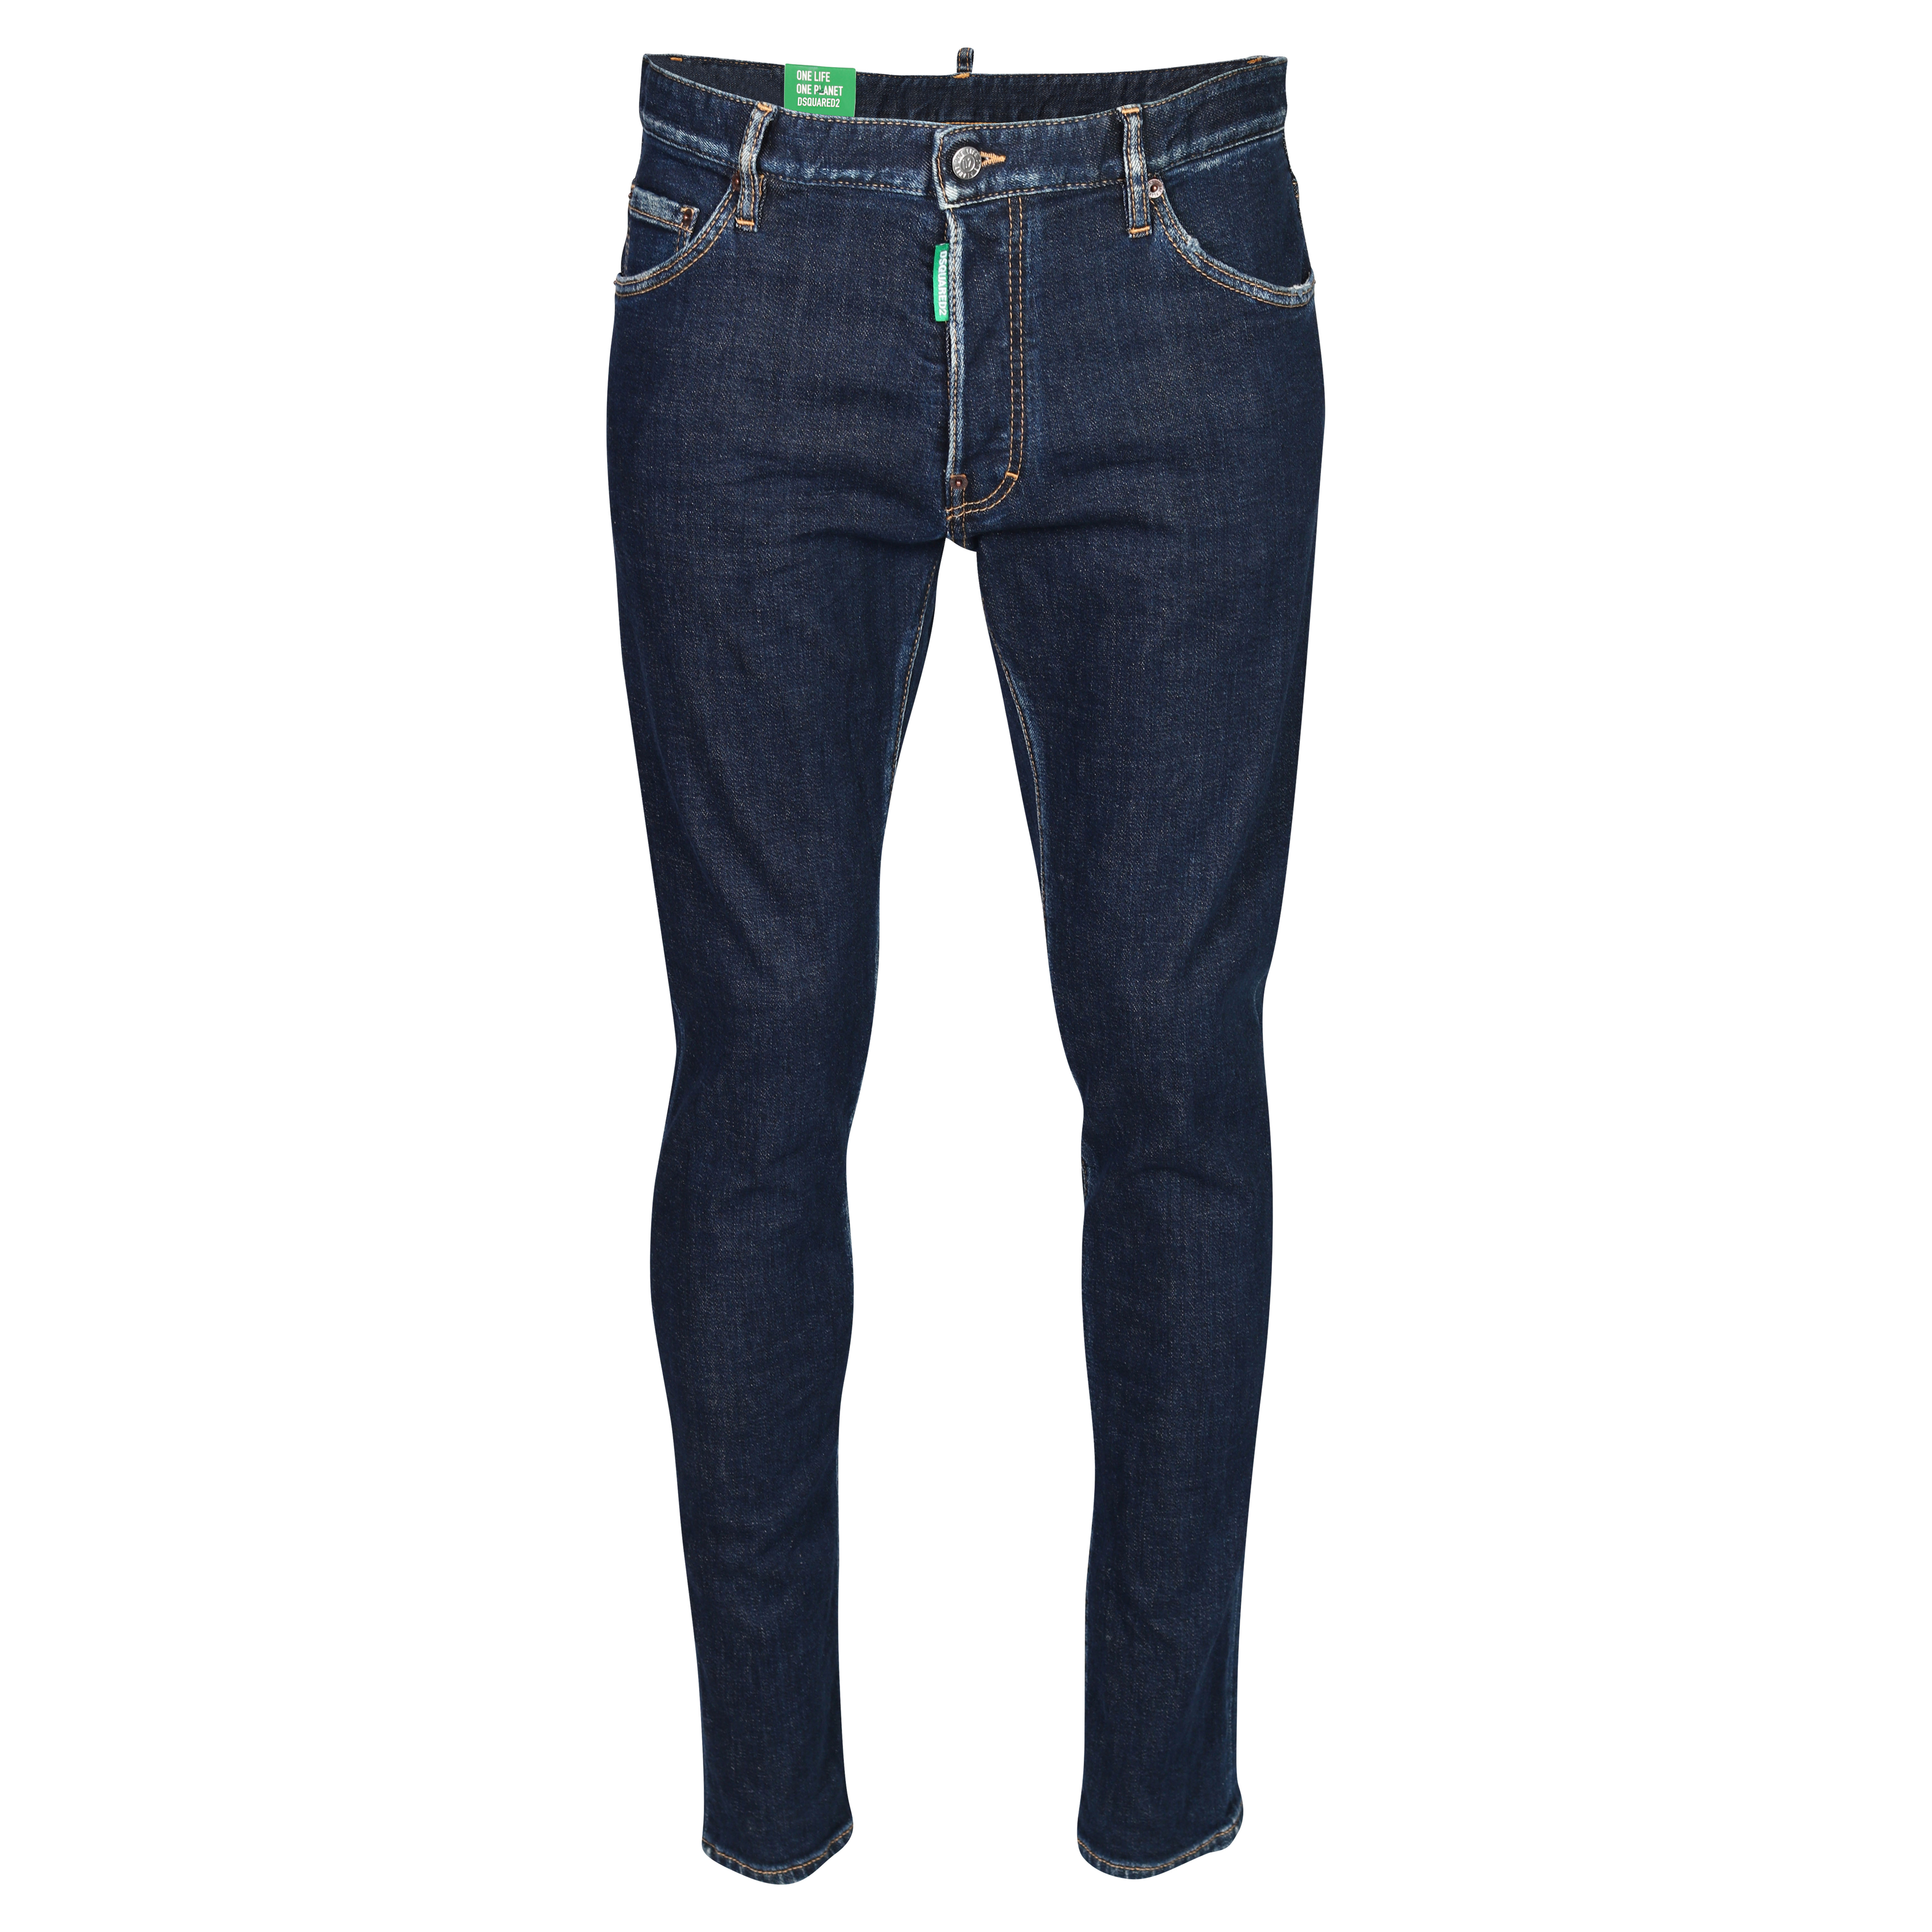 DSQUARED2 Green Label Cool Guy Jeans in Dark Blue 46